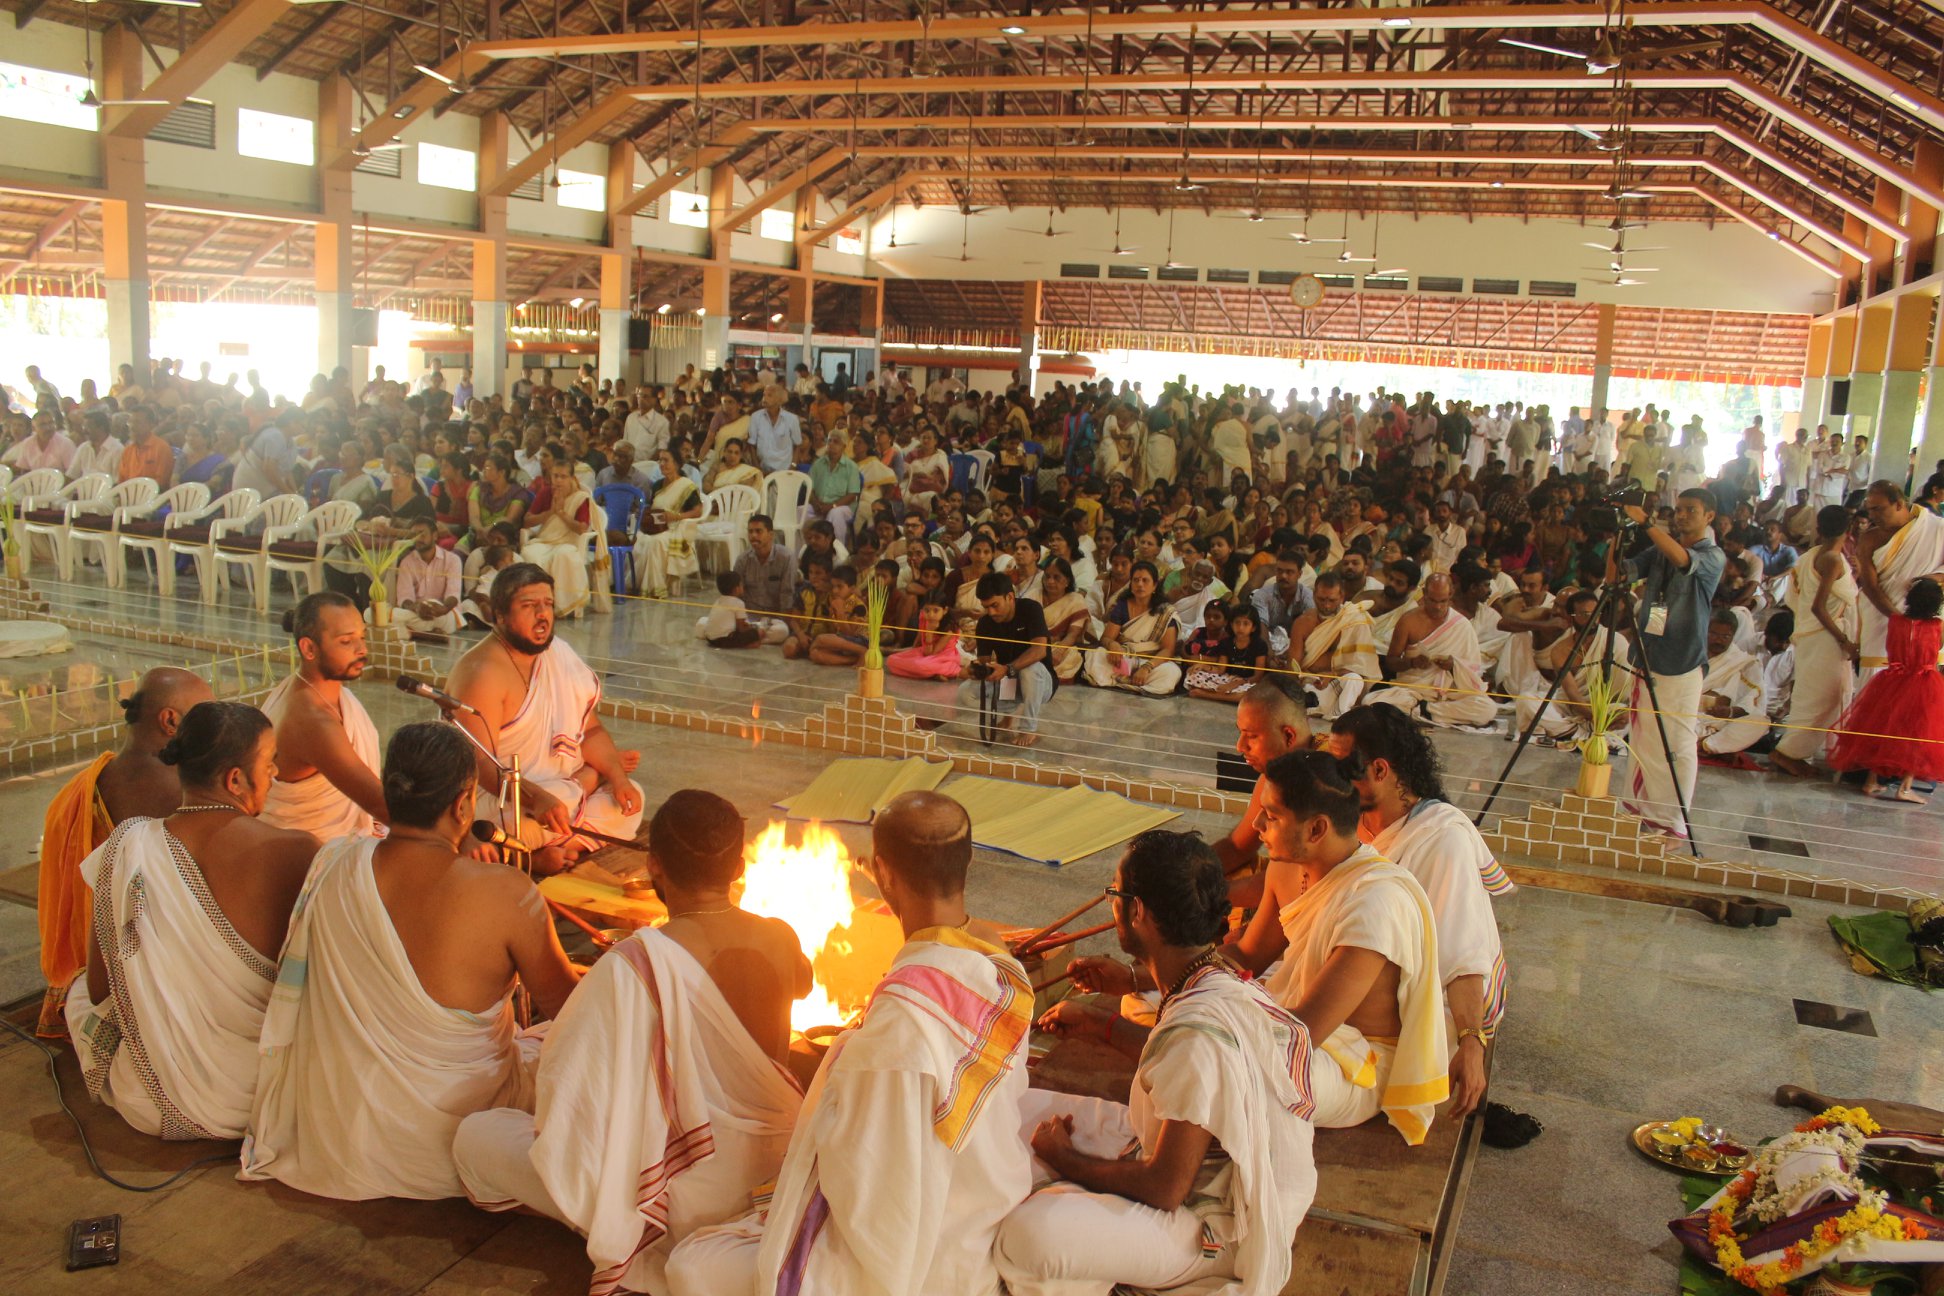 CEREMONIAL CHANTING OF VEDAMANTRAS